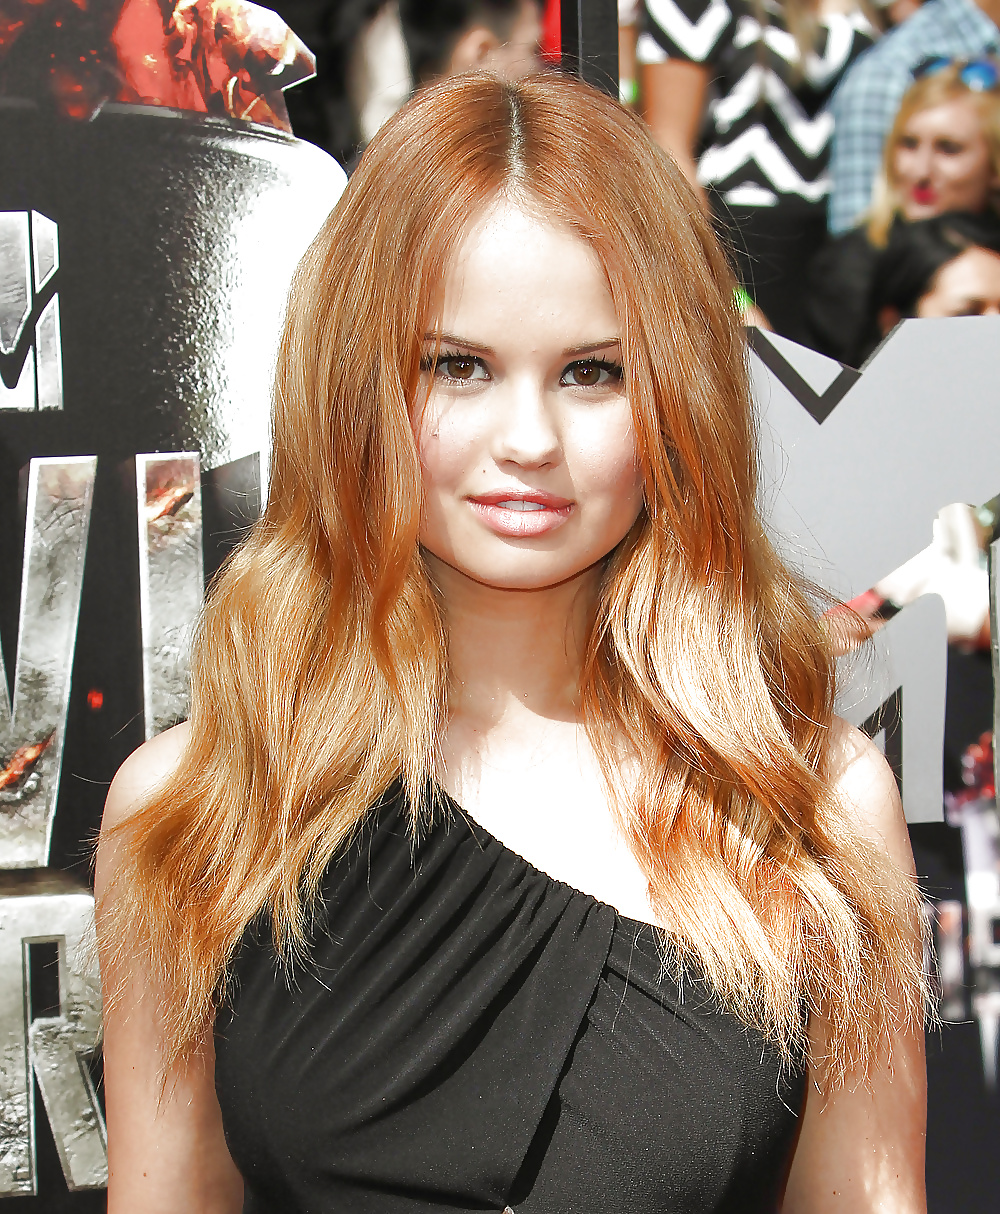 debby Comment what you would do to her (12/20)